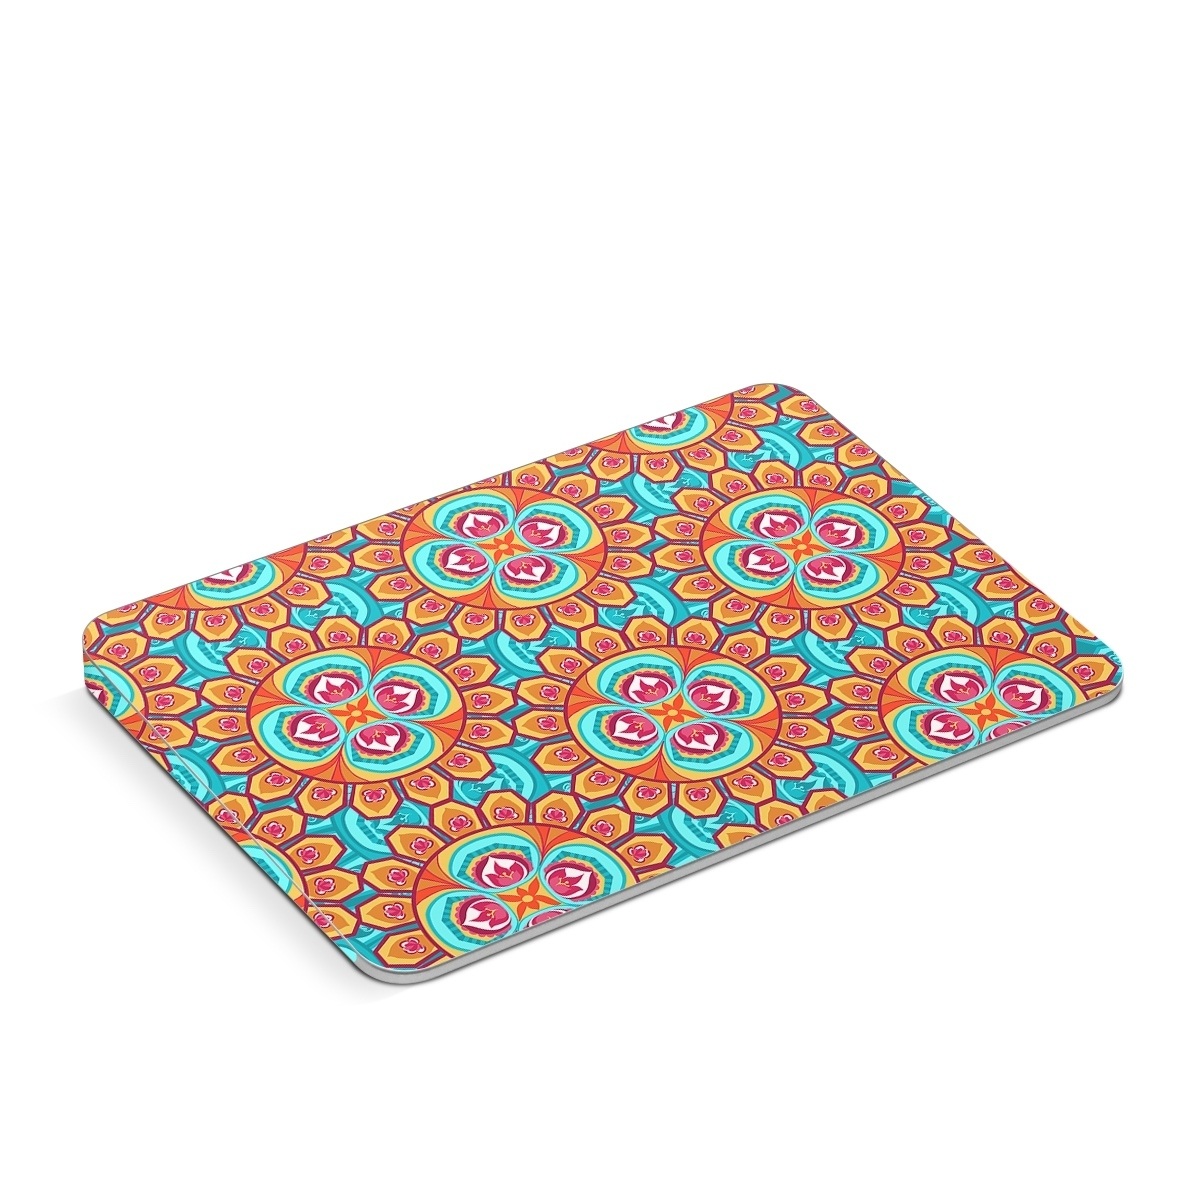 Apple Magic Trackpad Skin design of Pattern, Orange, Design, Textile, Wrapping paper, Visual arts, Motif, Circle, Art, with blue, orange, red, yellow colors